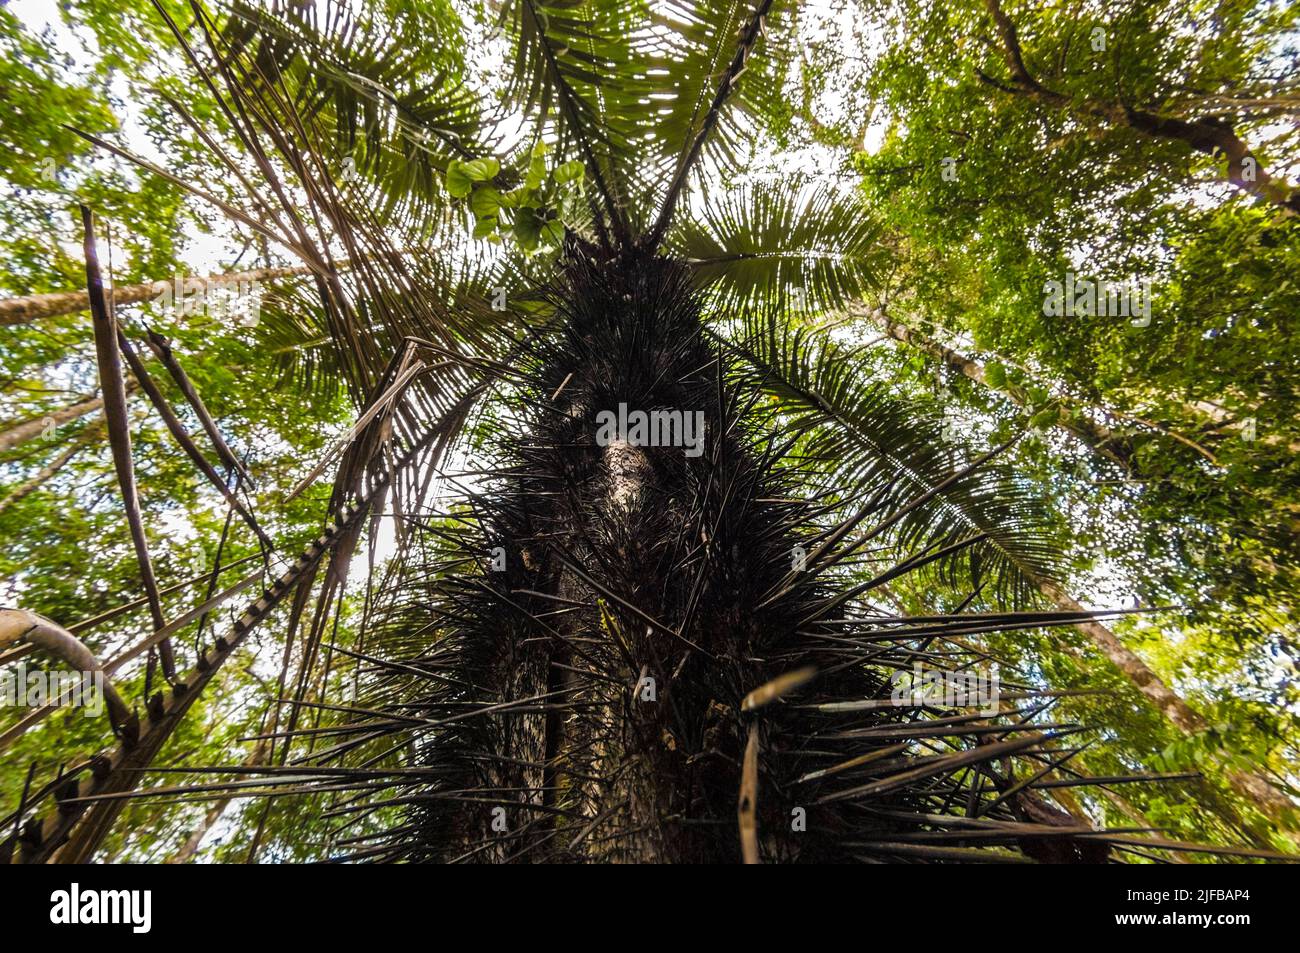 France, French Guiana, Amazonian Park, heart zone, Saül, young palm trees often have trunks bristling with thorns to protect themselves from predators Stock Photo